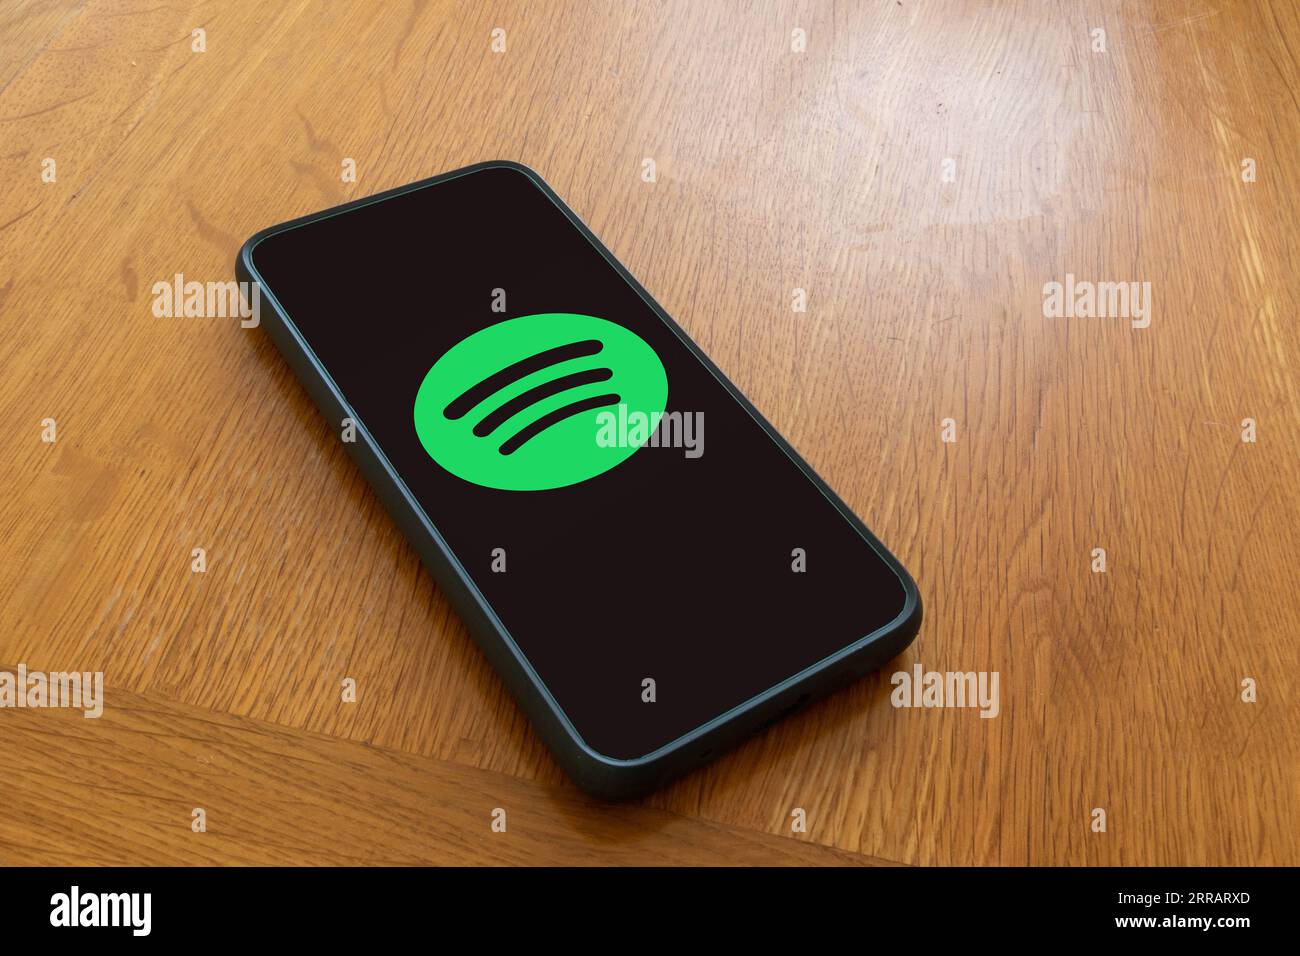 London, United Kingdom, 5th September 2023:- A mobile phone on a wooden table showing the Spotify streaming service’s logo Stock Photo